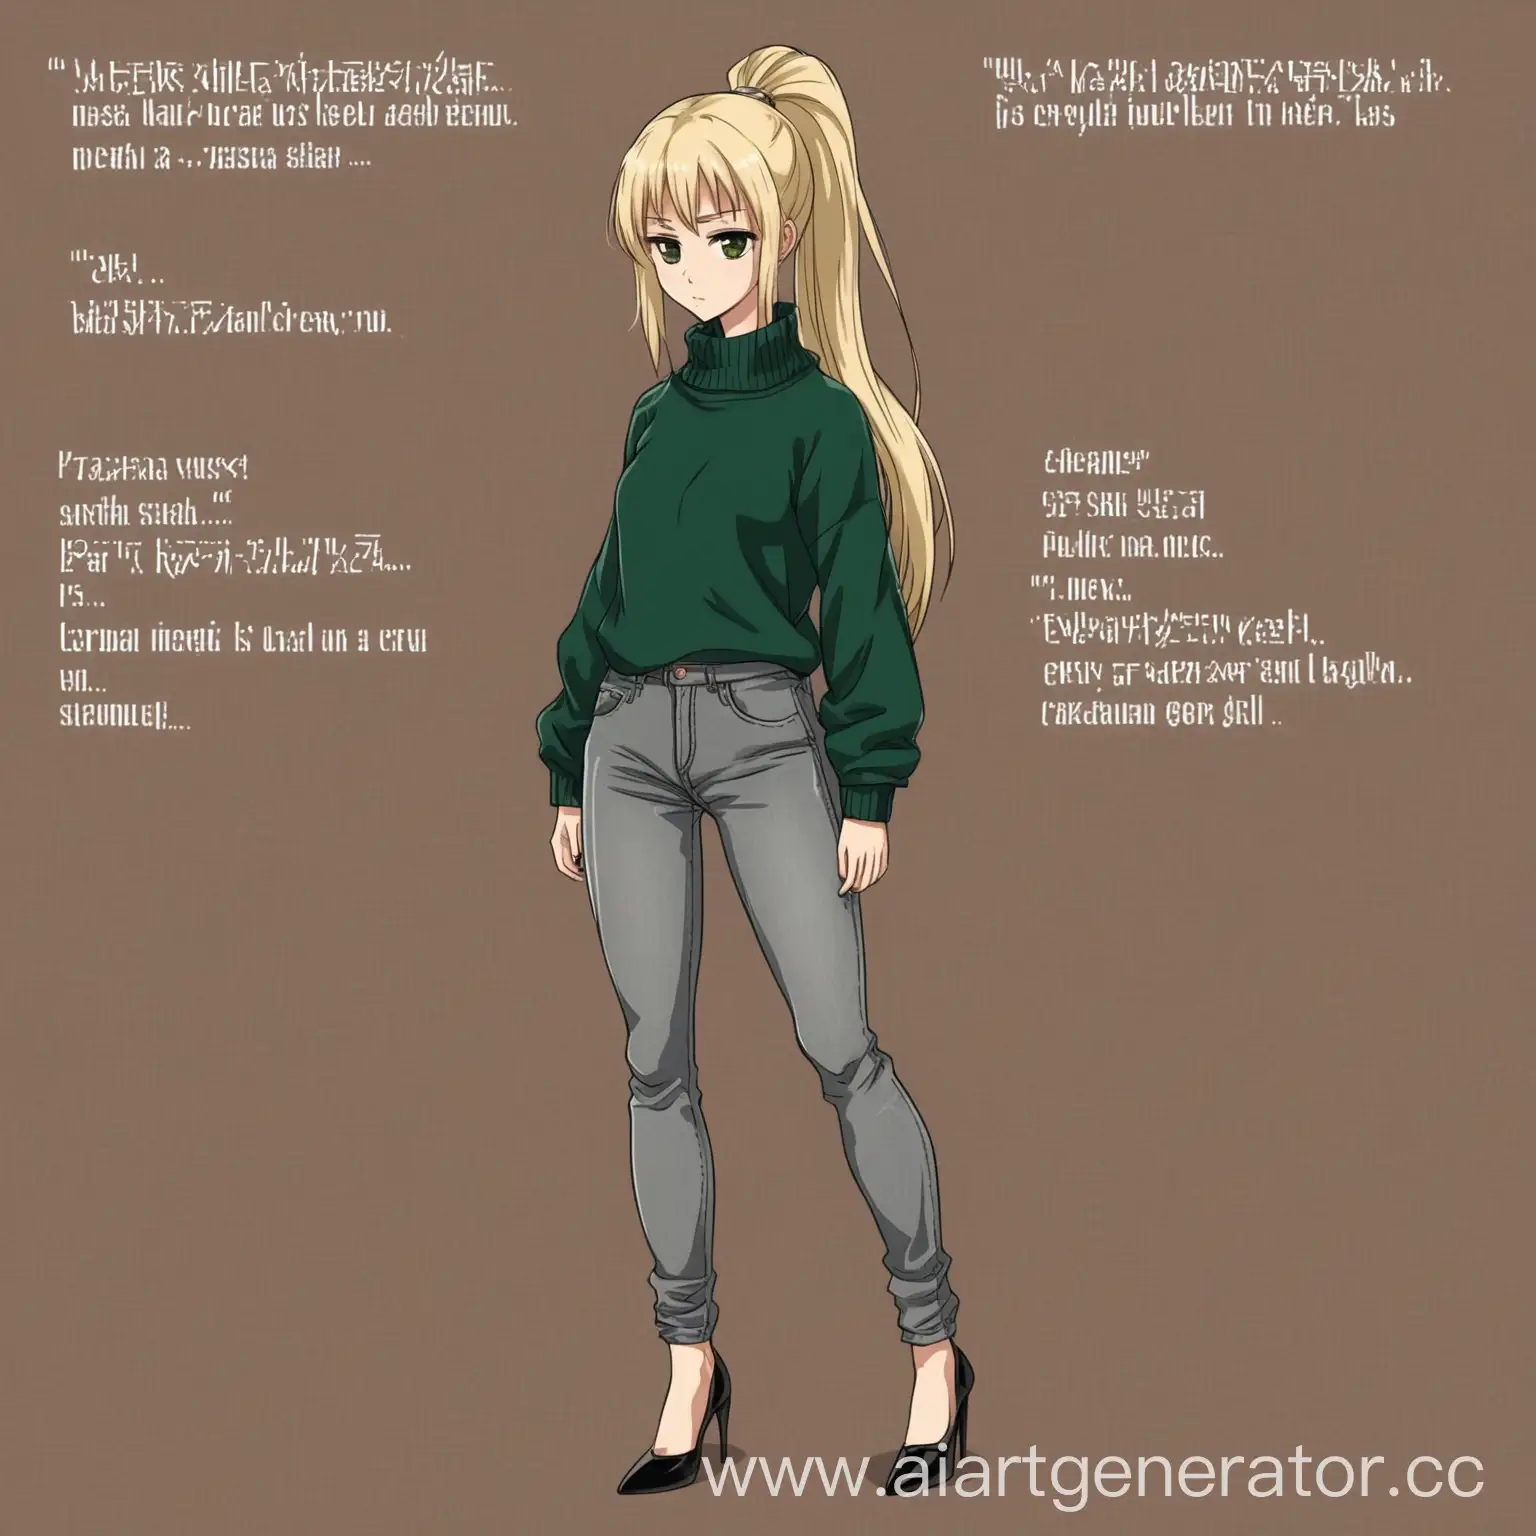 Anime-BrownEyed-Girl-in-Green-Sweater-and-Blonde-Friend-in-Gray-Jeans-and-Black-Heels